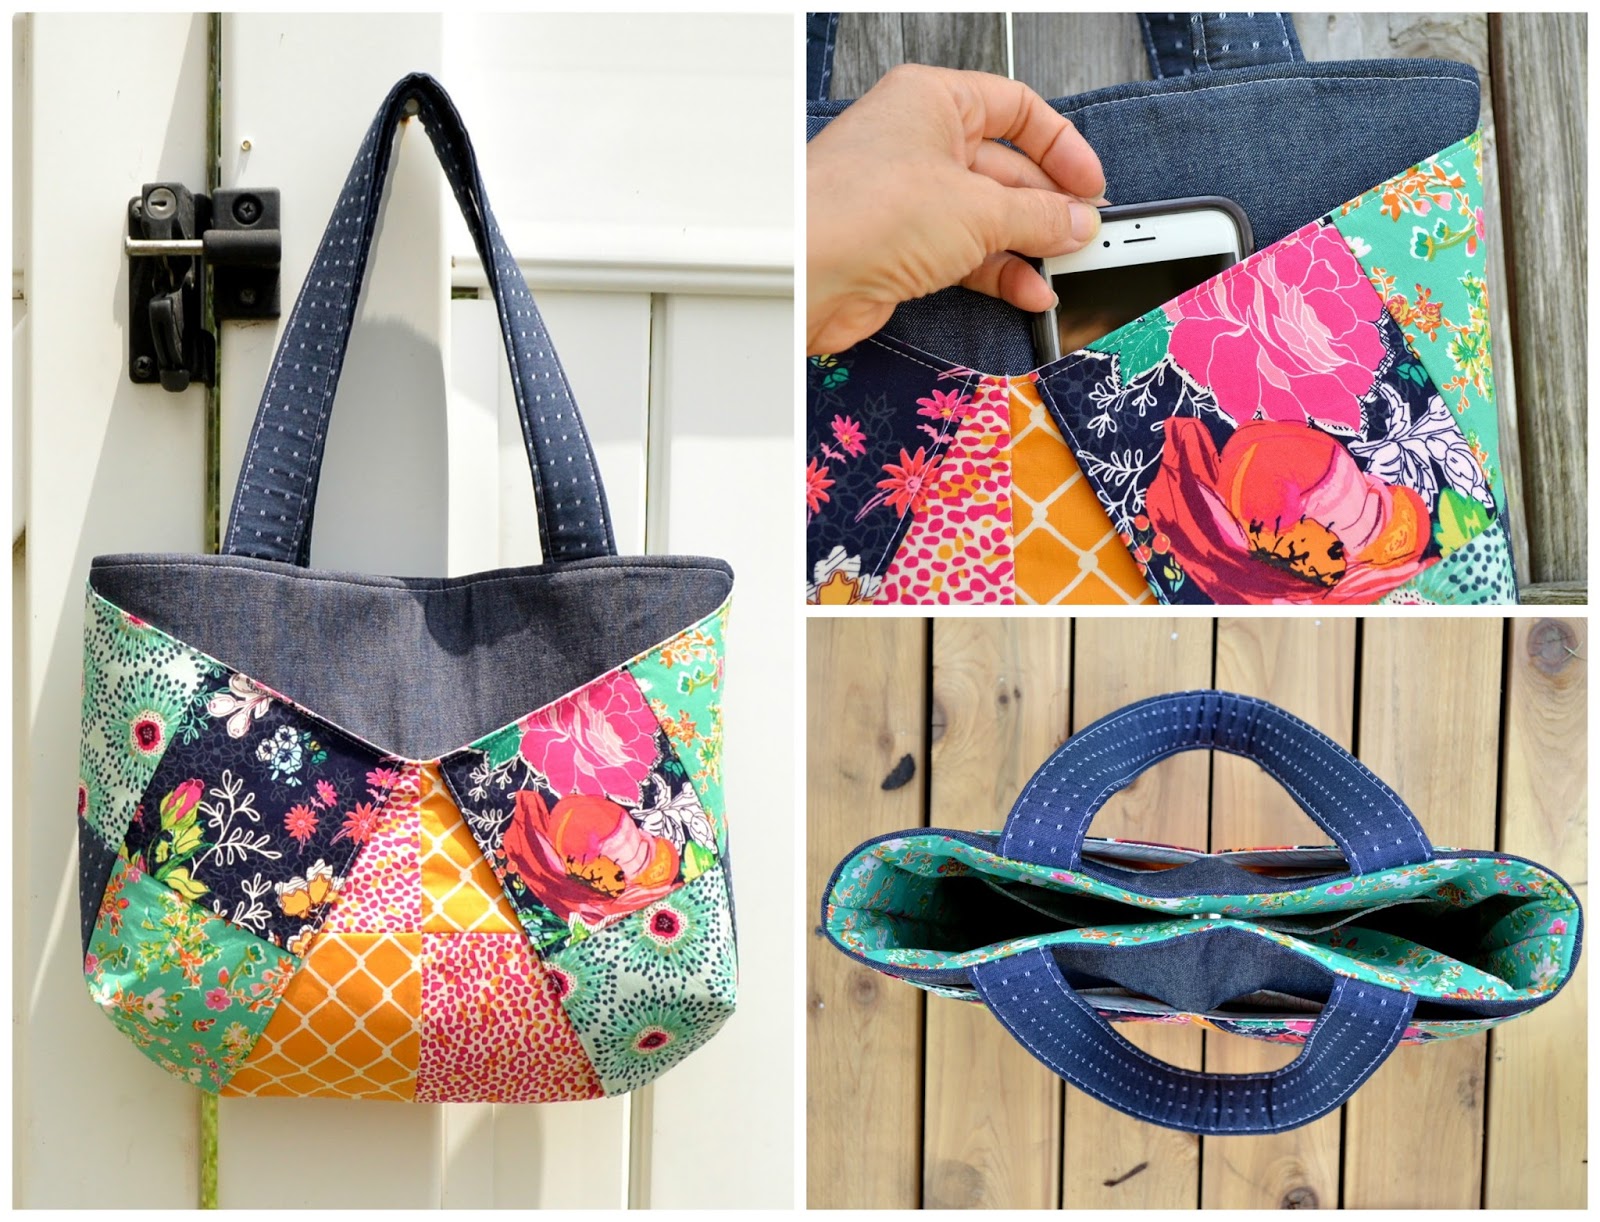 Blue Susan makes: Colorful Patchwork Bags and Baskets- Craftsy Class Review